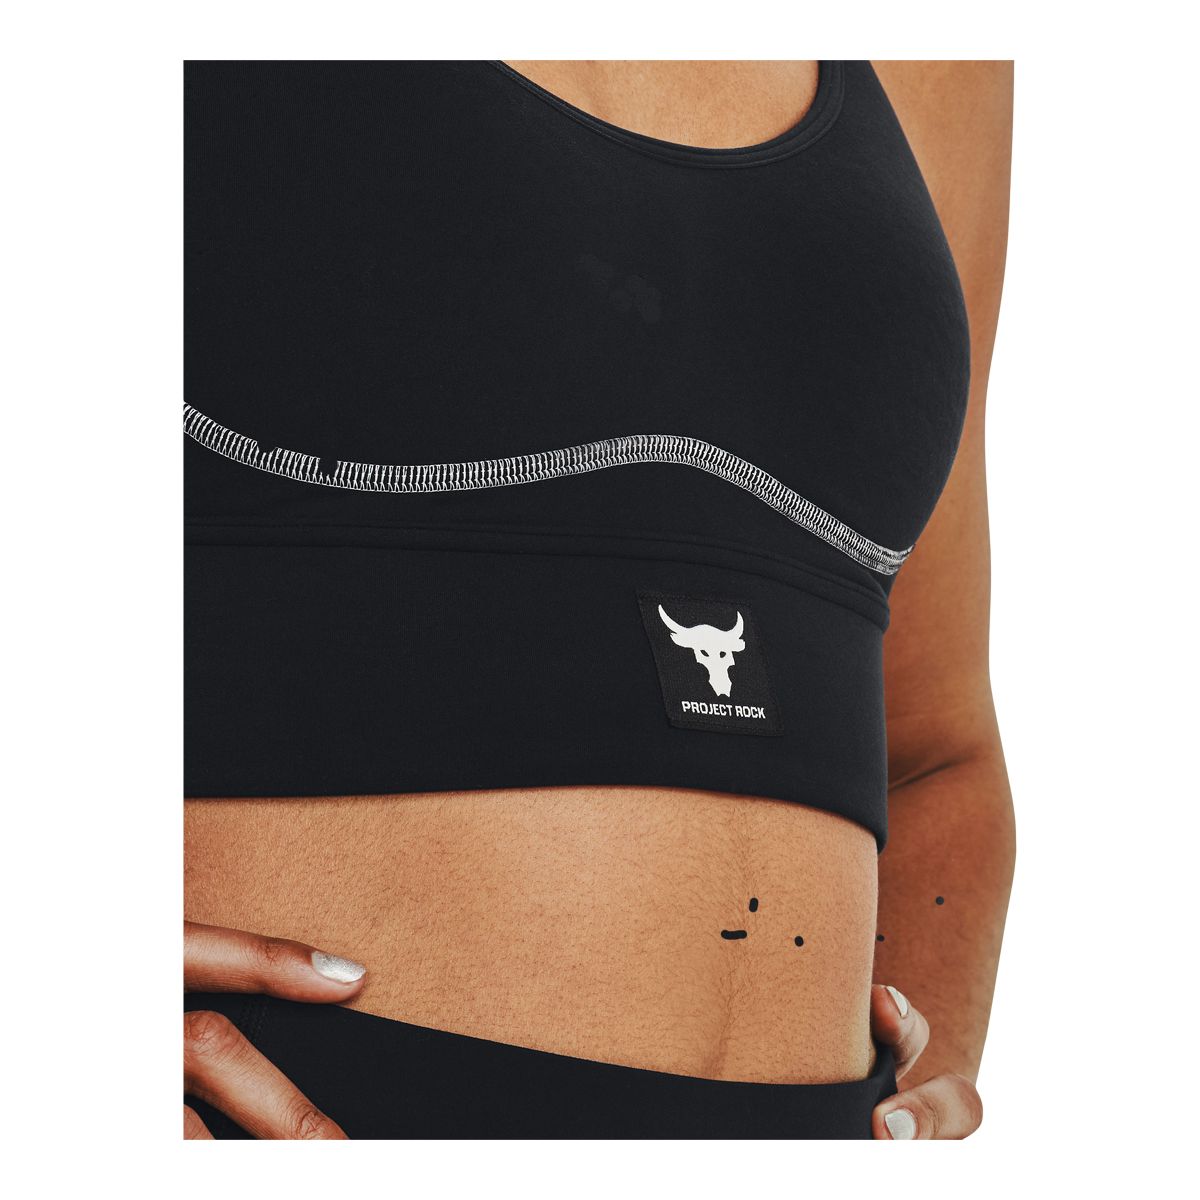 Rockwear - Wear this Sports Bra alone with coordinating tights or under a  singlet or hoodie, this laser cut Sports Bra offer medium to high impact  support and comfort.✨